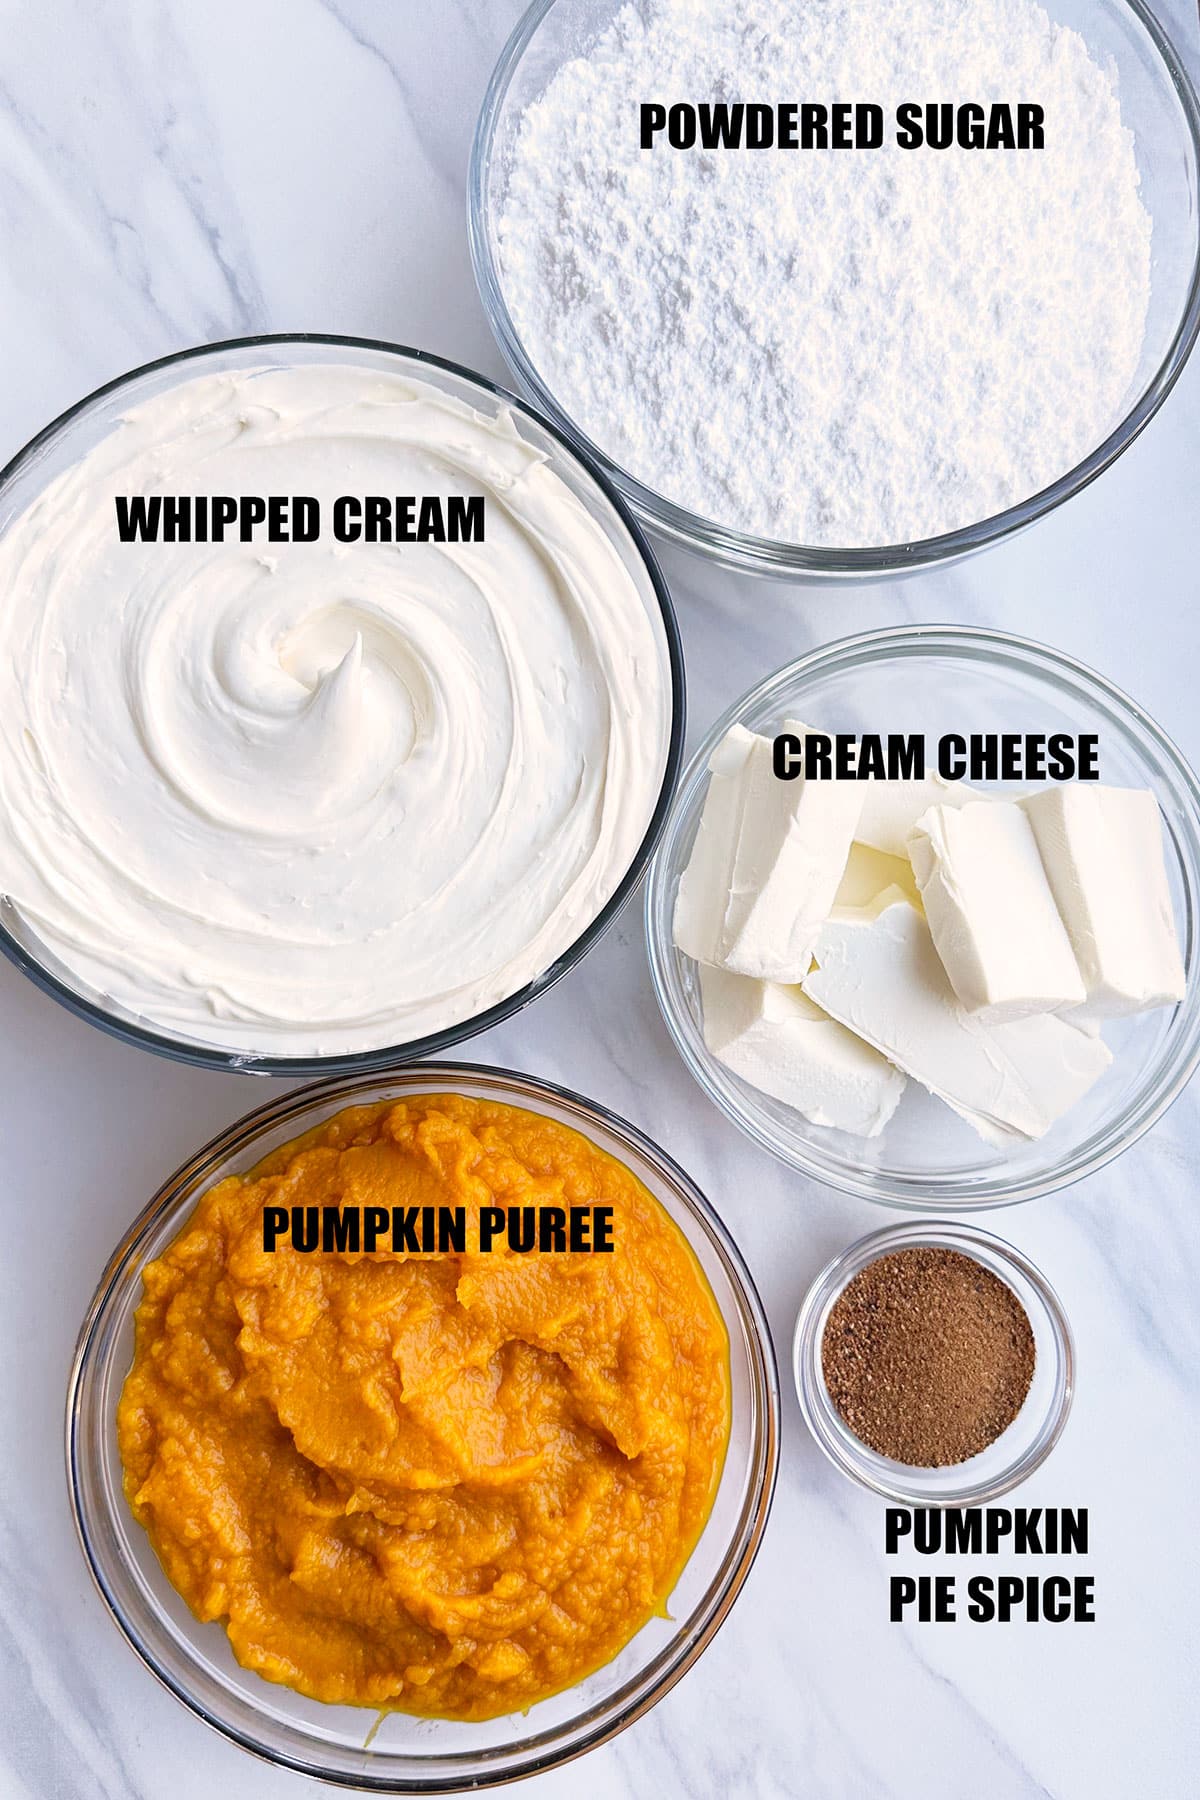 Ingredients in Bowls For Sweet Dip on White Marble Background. 